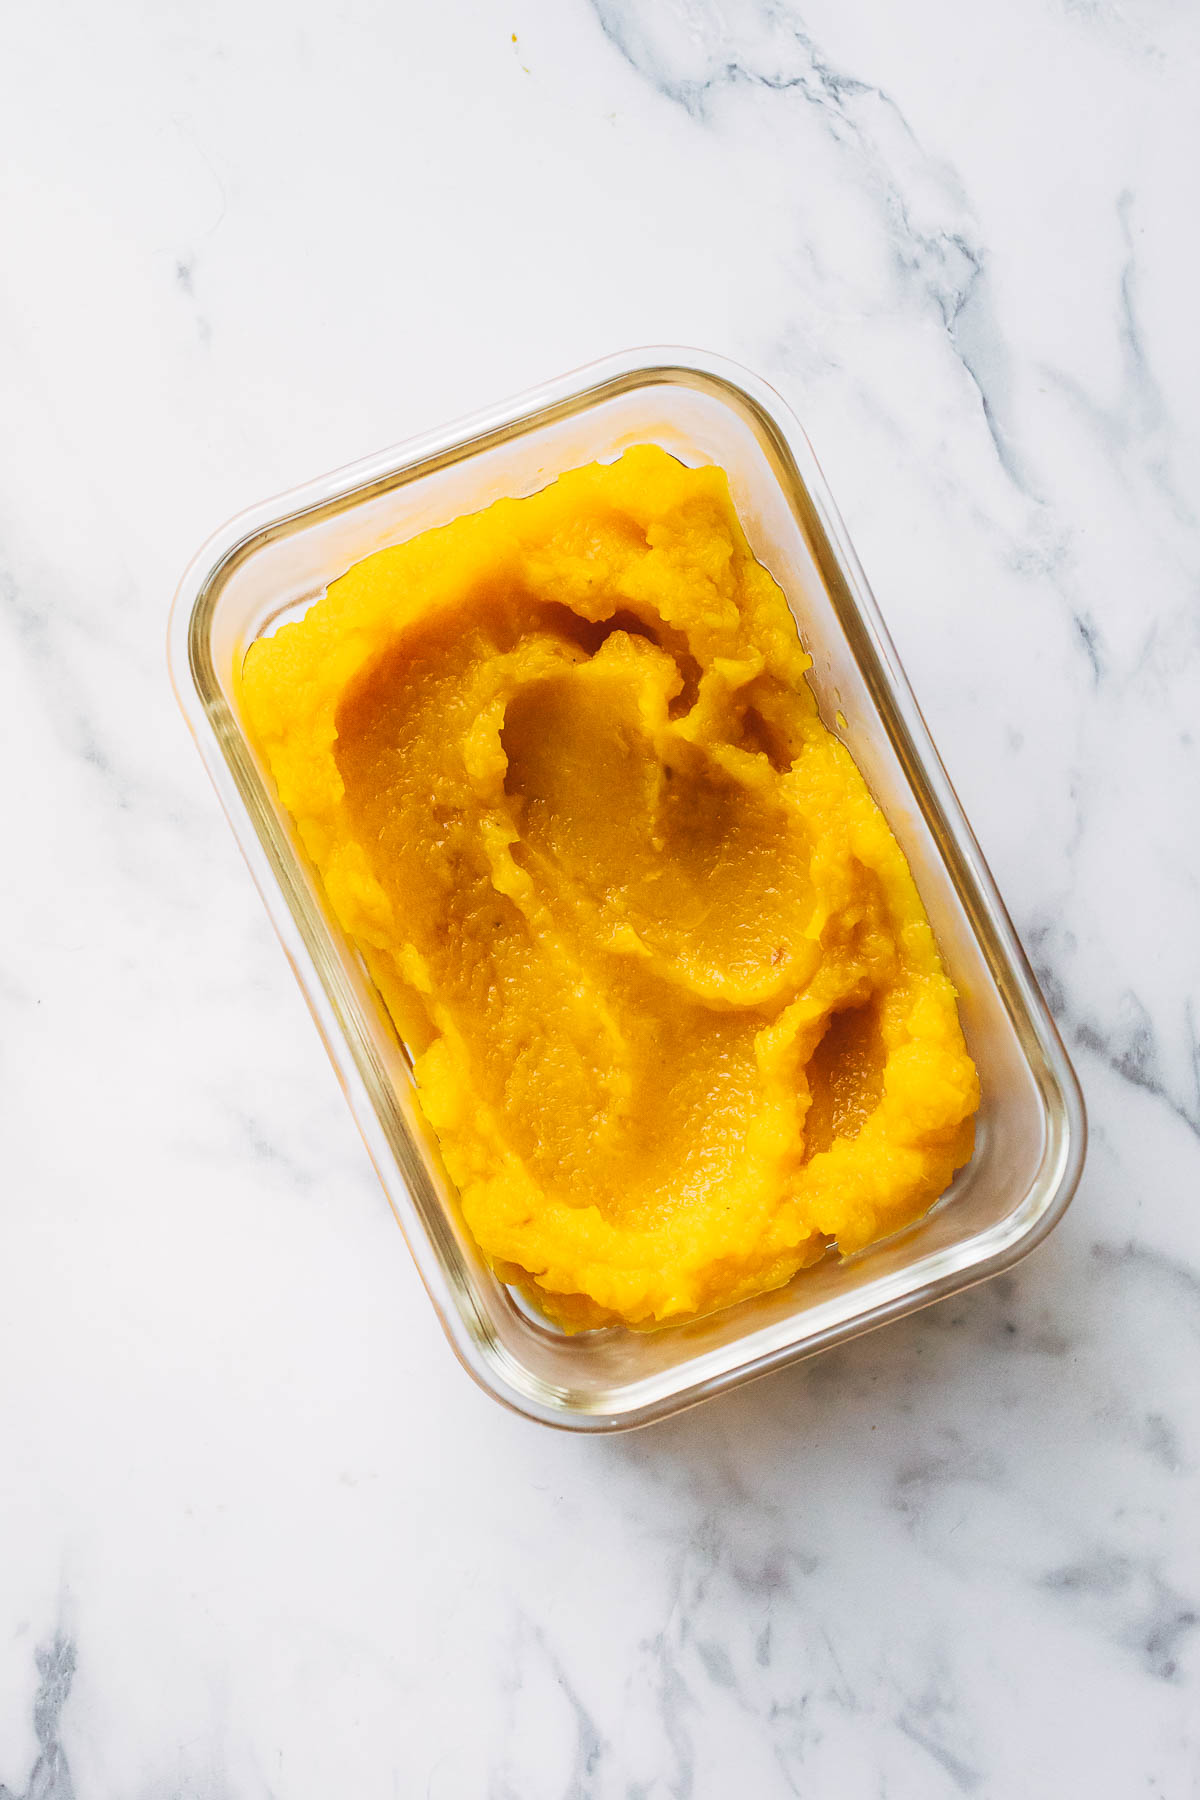 A rectangle glass dish filled with homemade pumpkin purée.